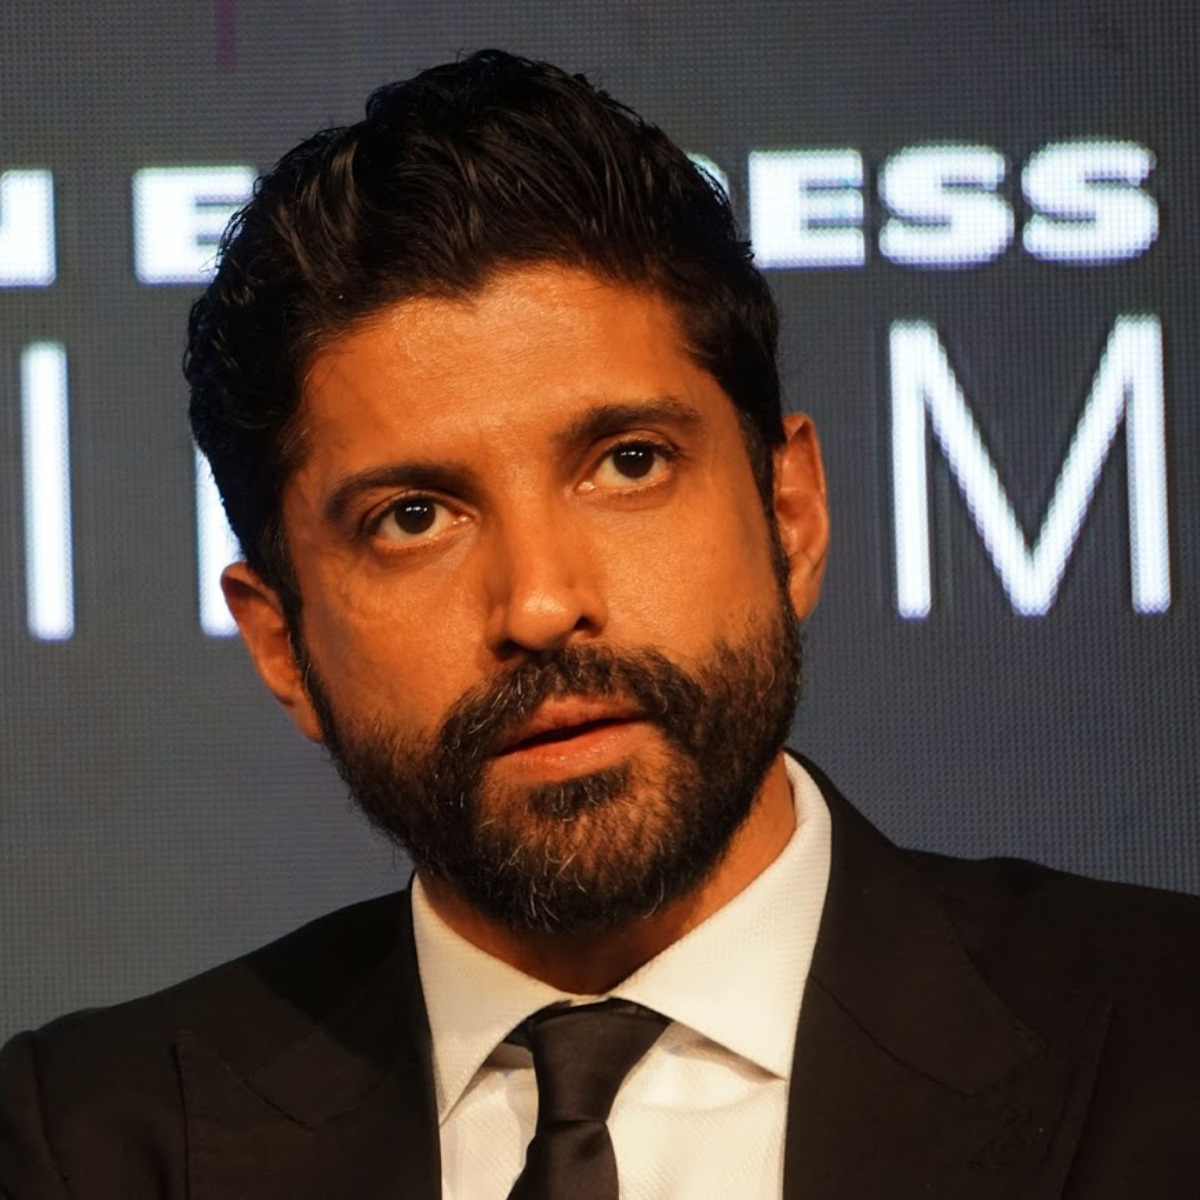 EXCLUSIVE: Farhan Akhtar calls Dilip Kumar an ‘institution’: I remember taking his autograph when I was a kid